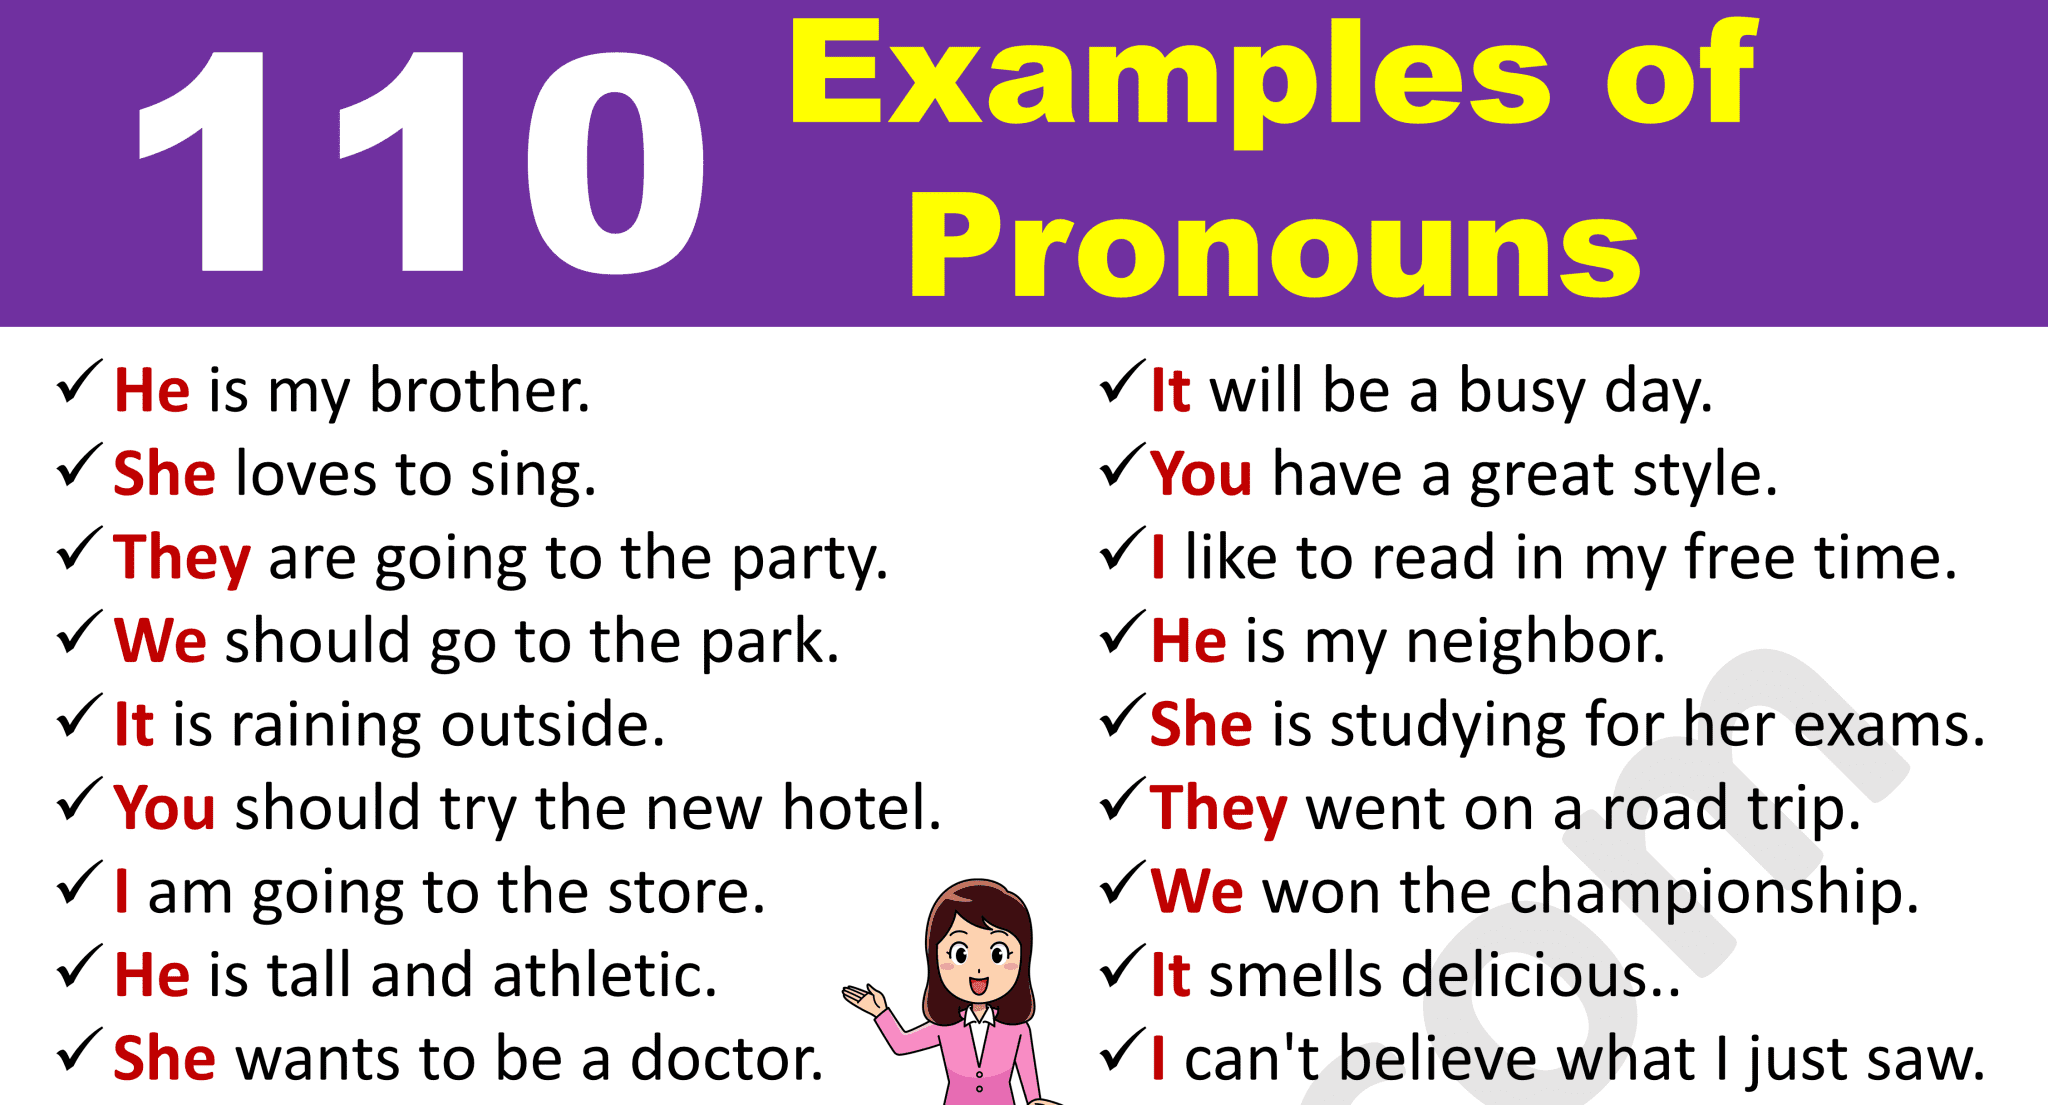 110-examples-of-pronouns-in-sentences-ilmrary